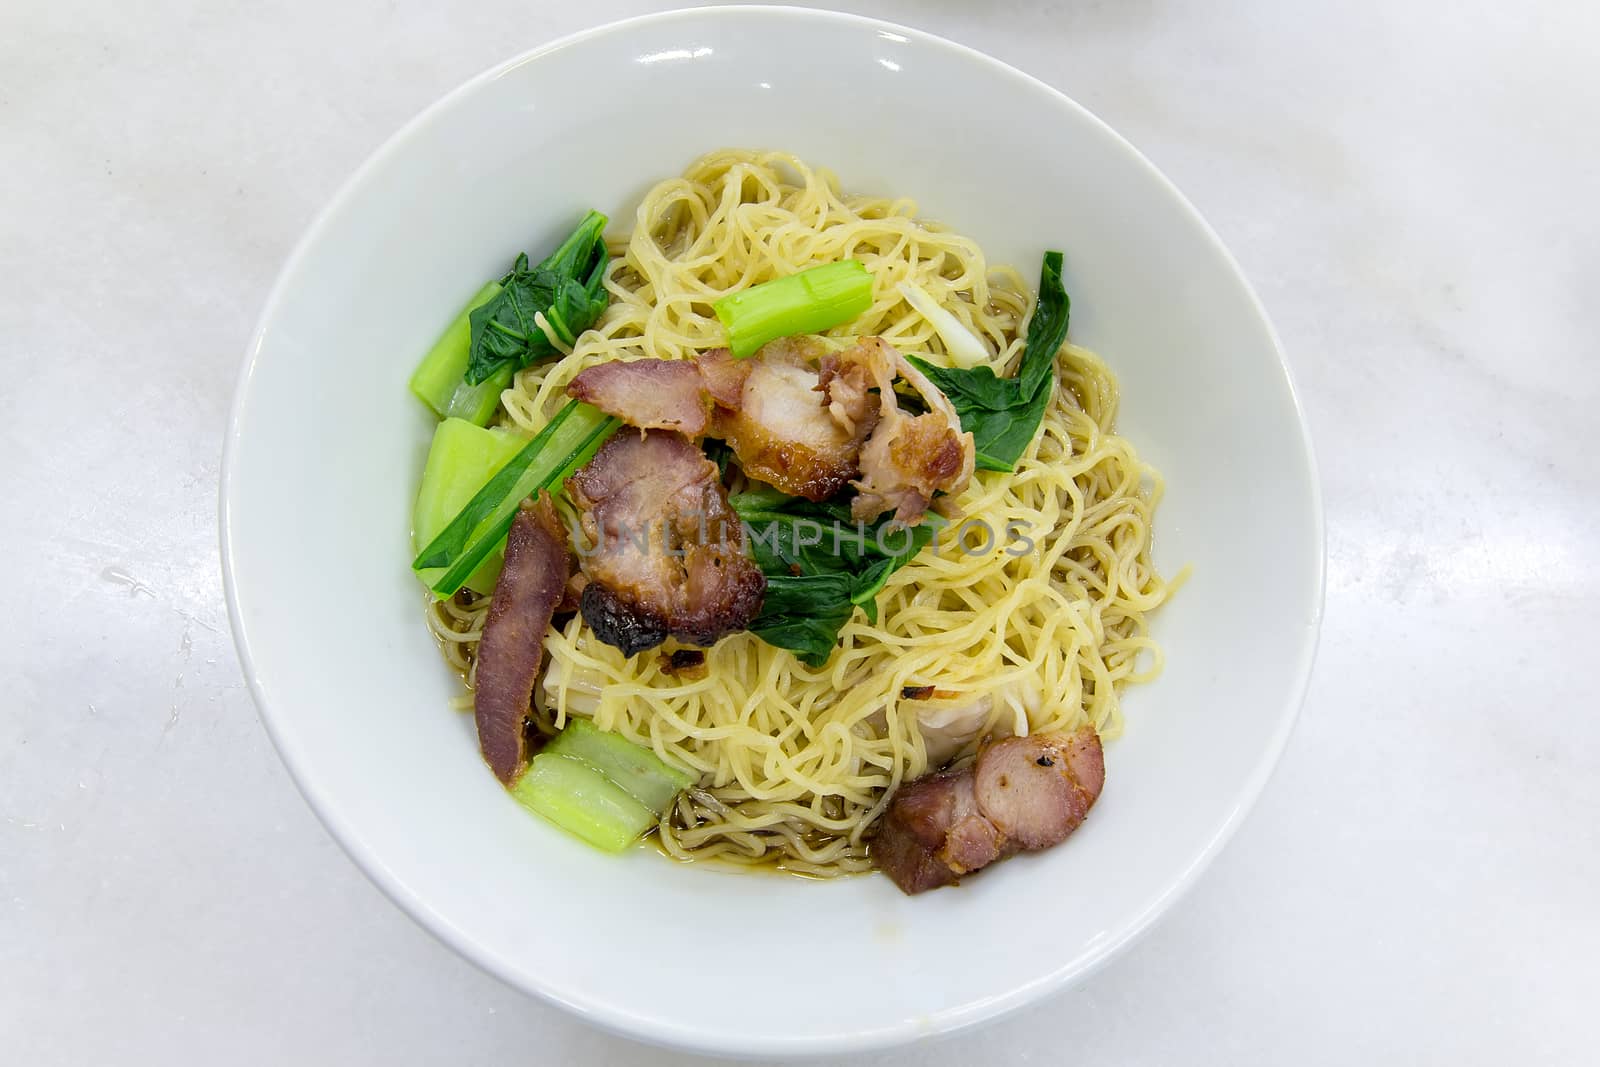 Char Siew Barbecue Pork Wanton Noodles Closeup by jpldesigns